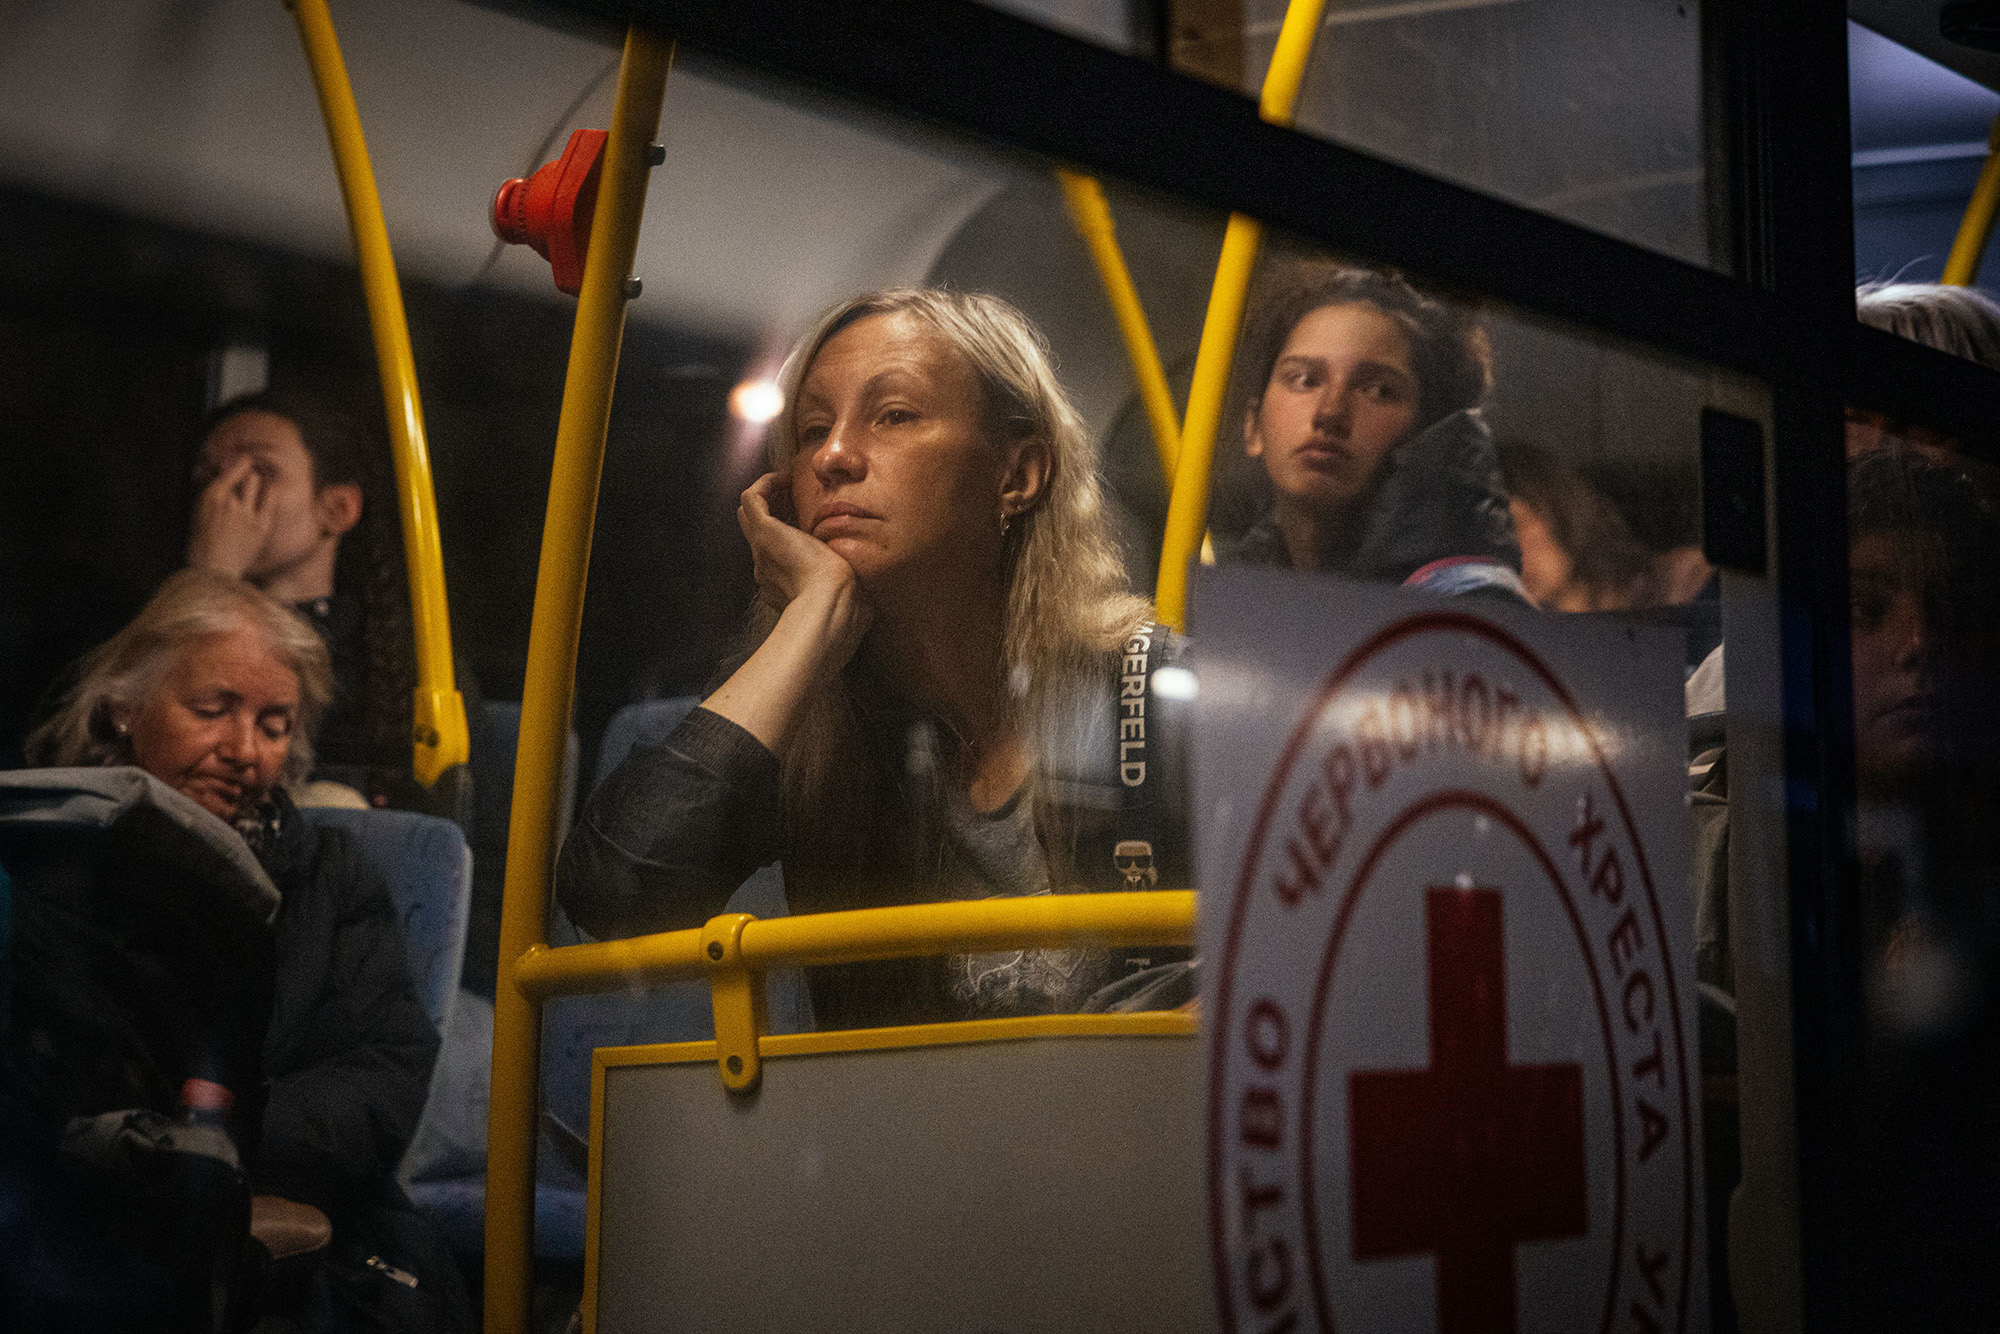 People evacuated from Mariupol arrive on buses at a registration and processing area for internally displaced people in Zaporizhzhia, Ukraine, on May 8.